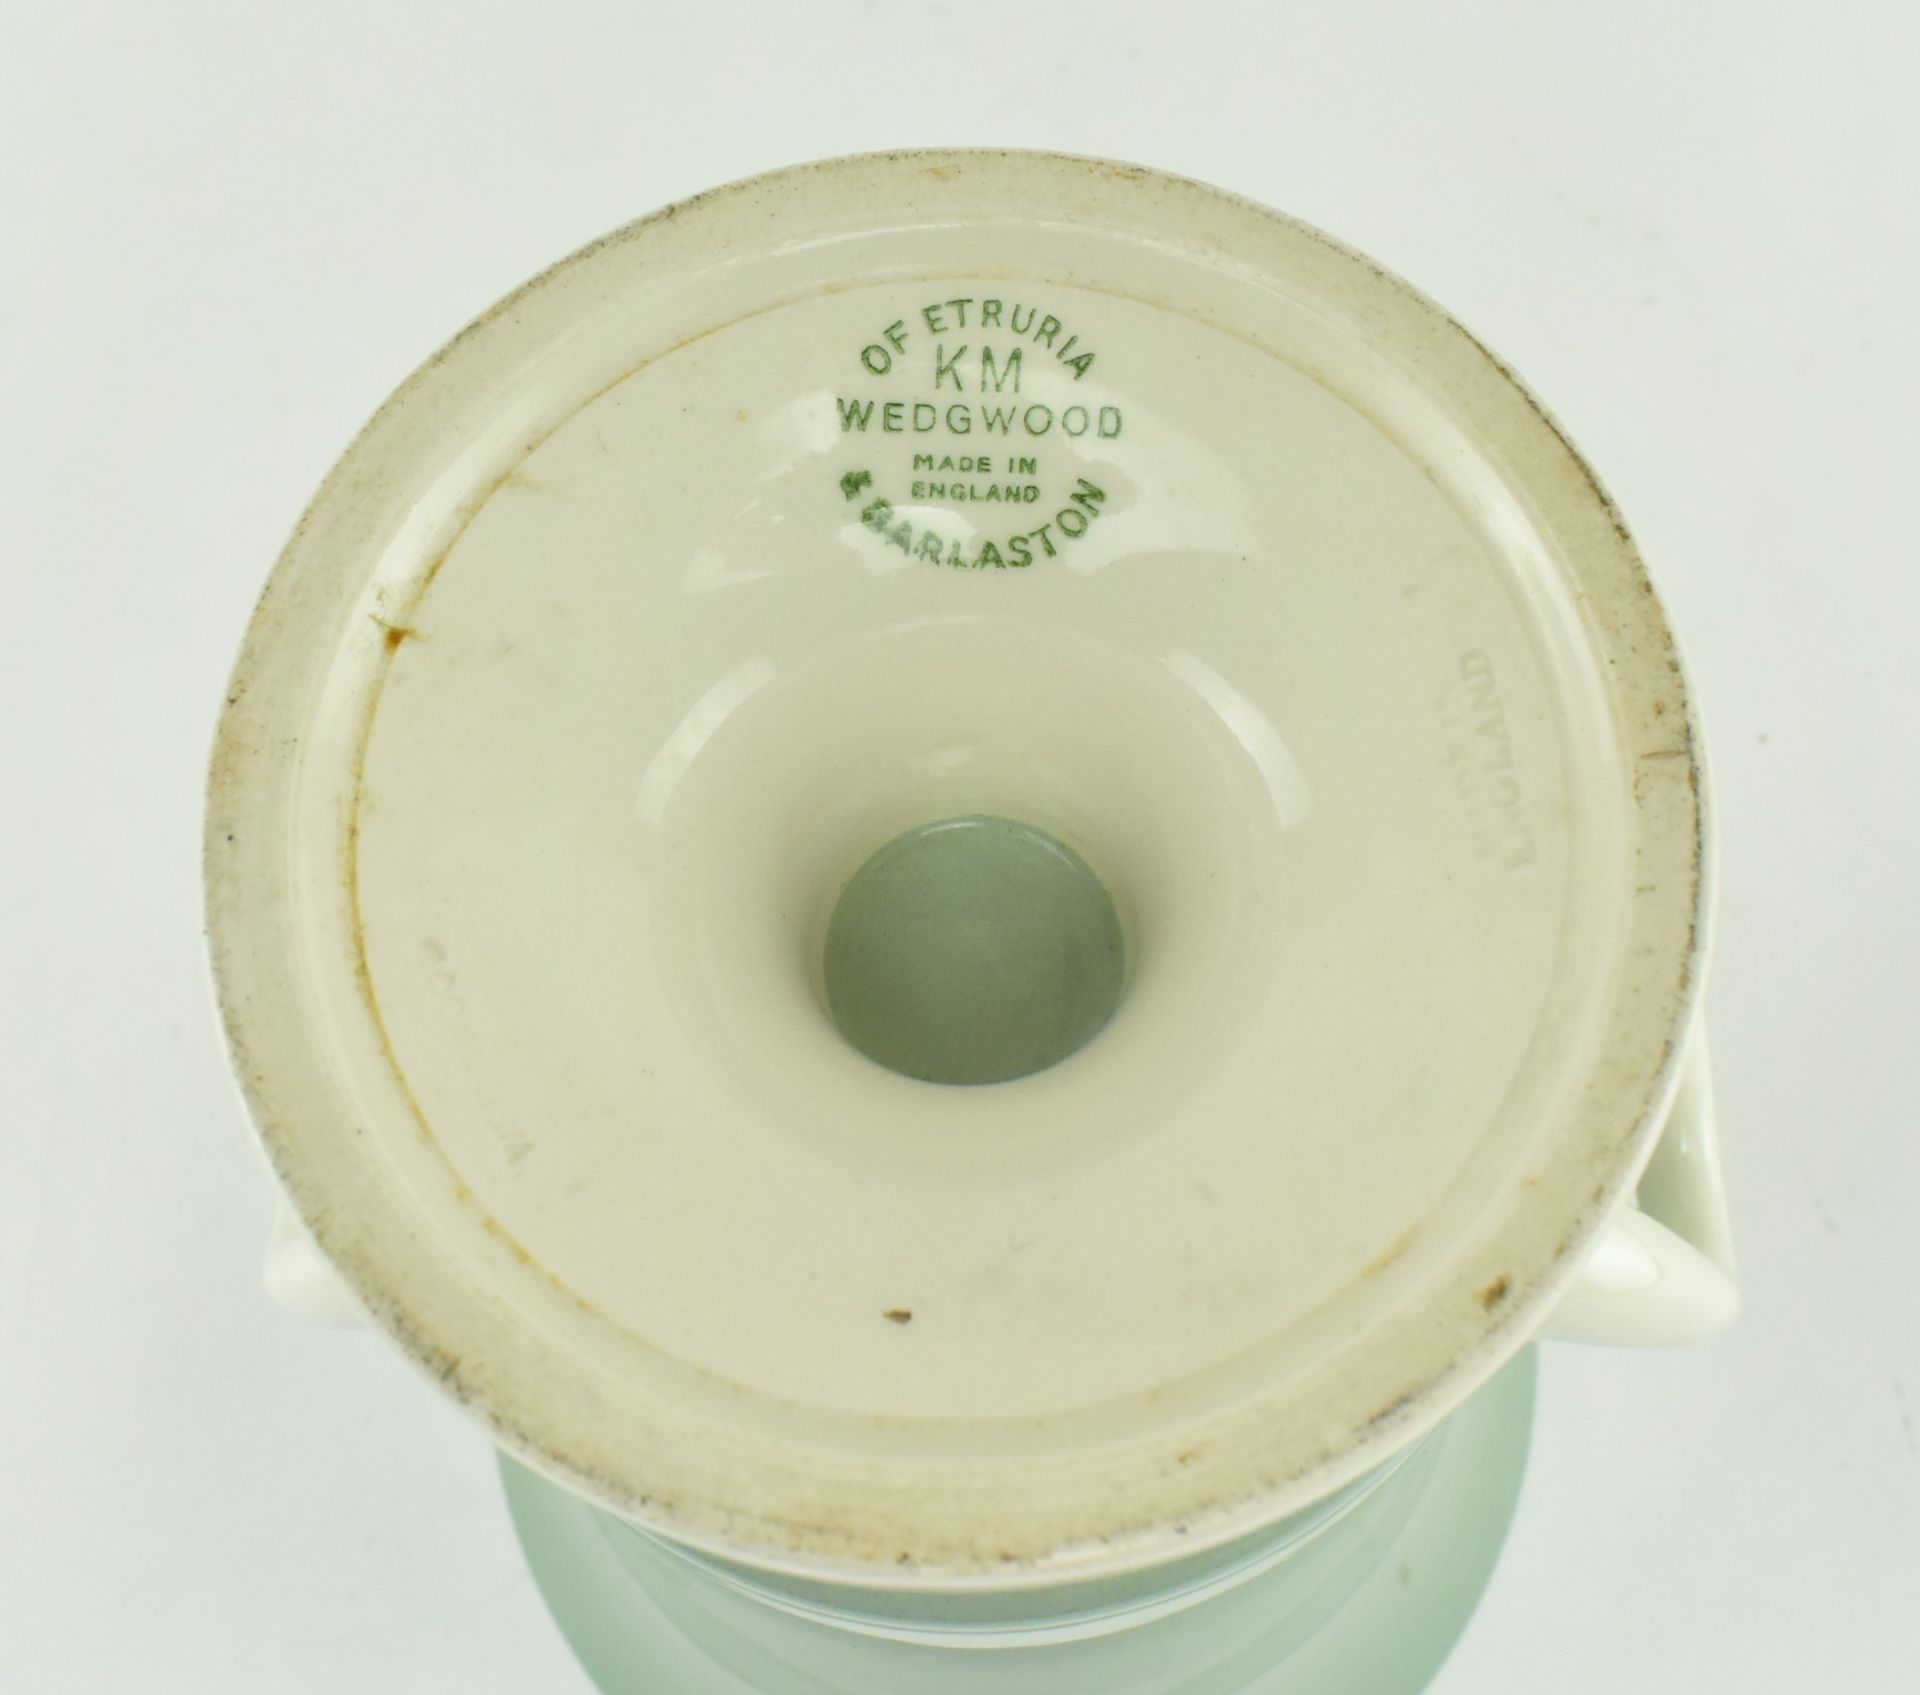 KEITH MURRAY FOR WEDGWOOD - CERAMIC CAMPANA URN IN SAGE - Image 6 of 6